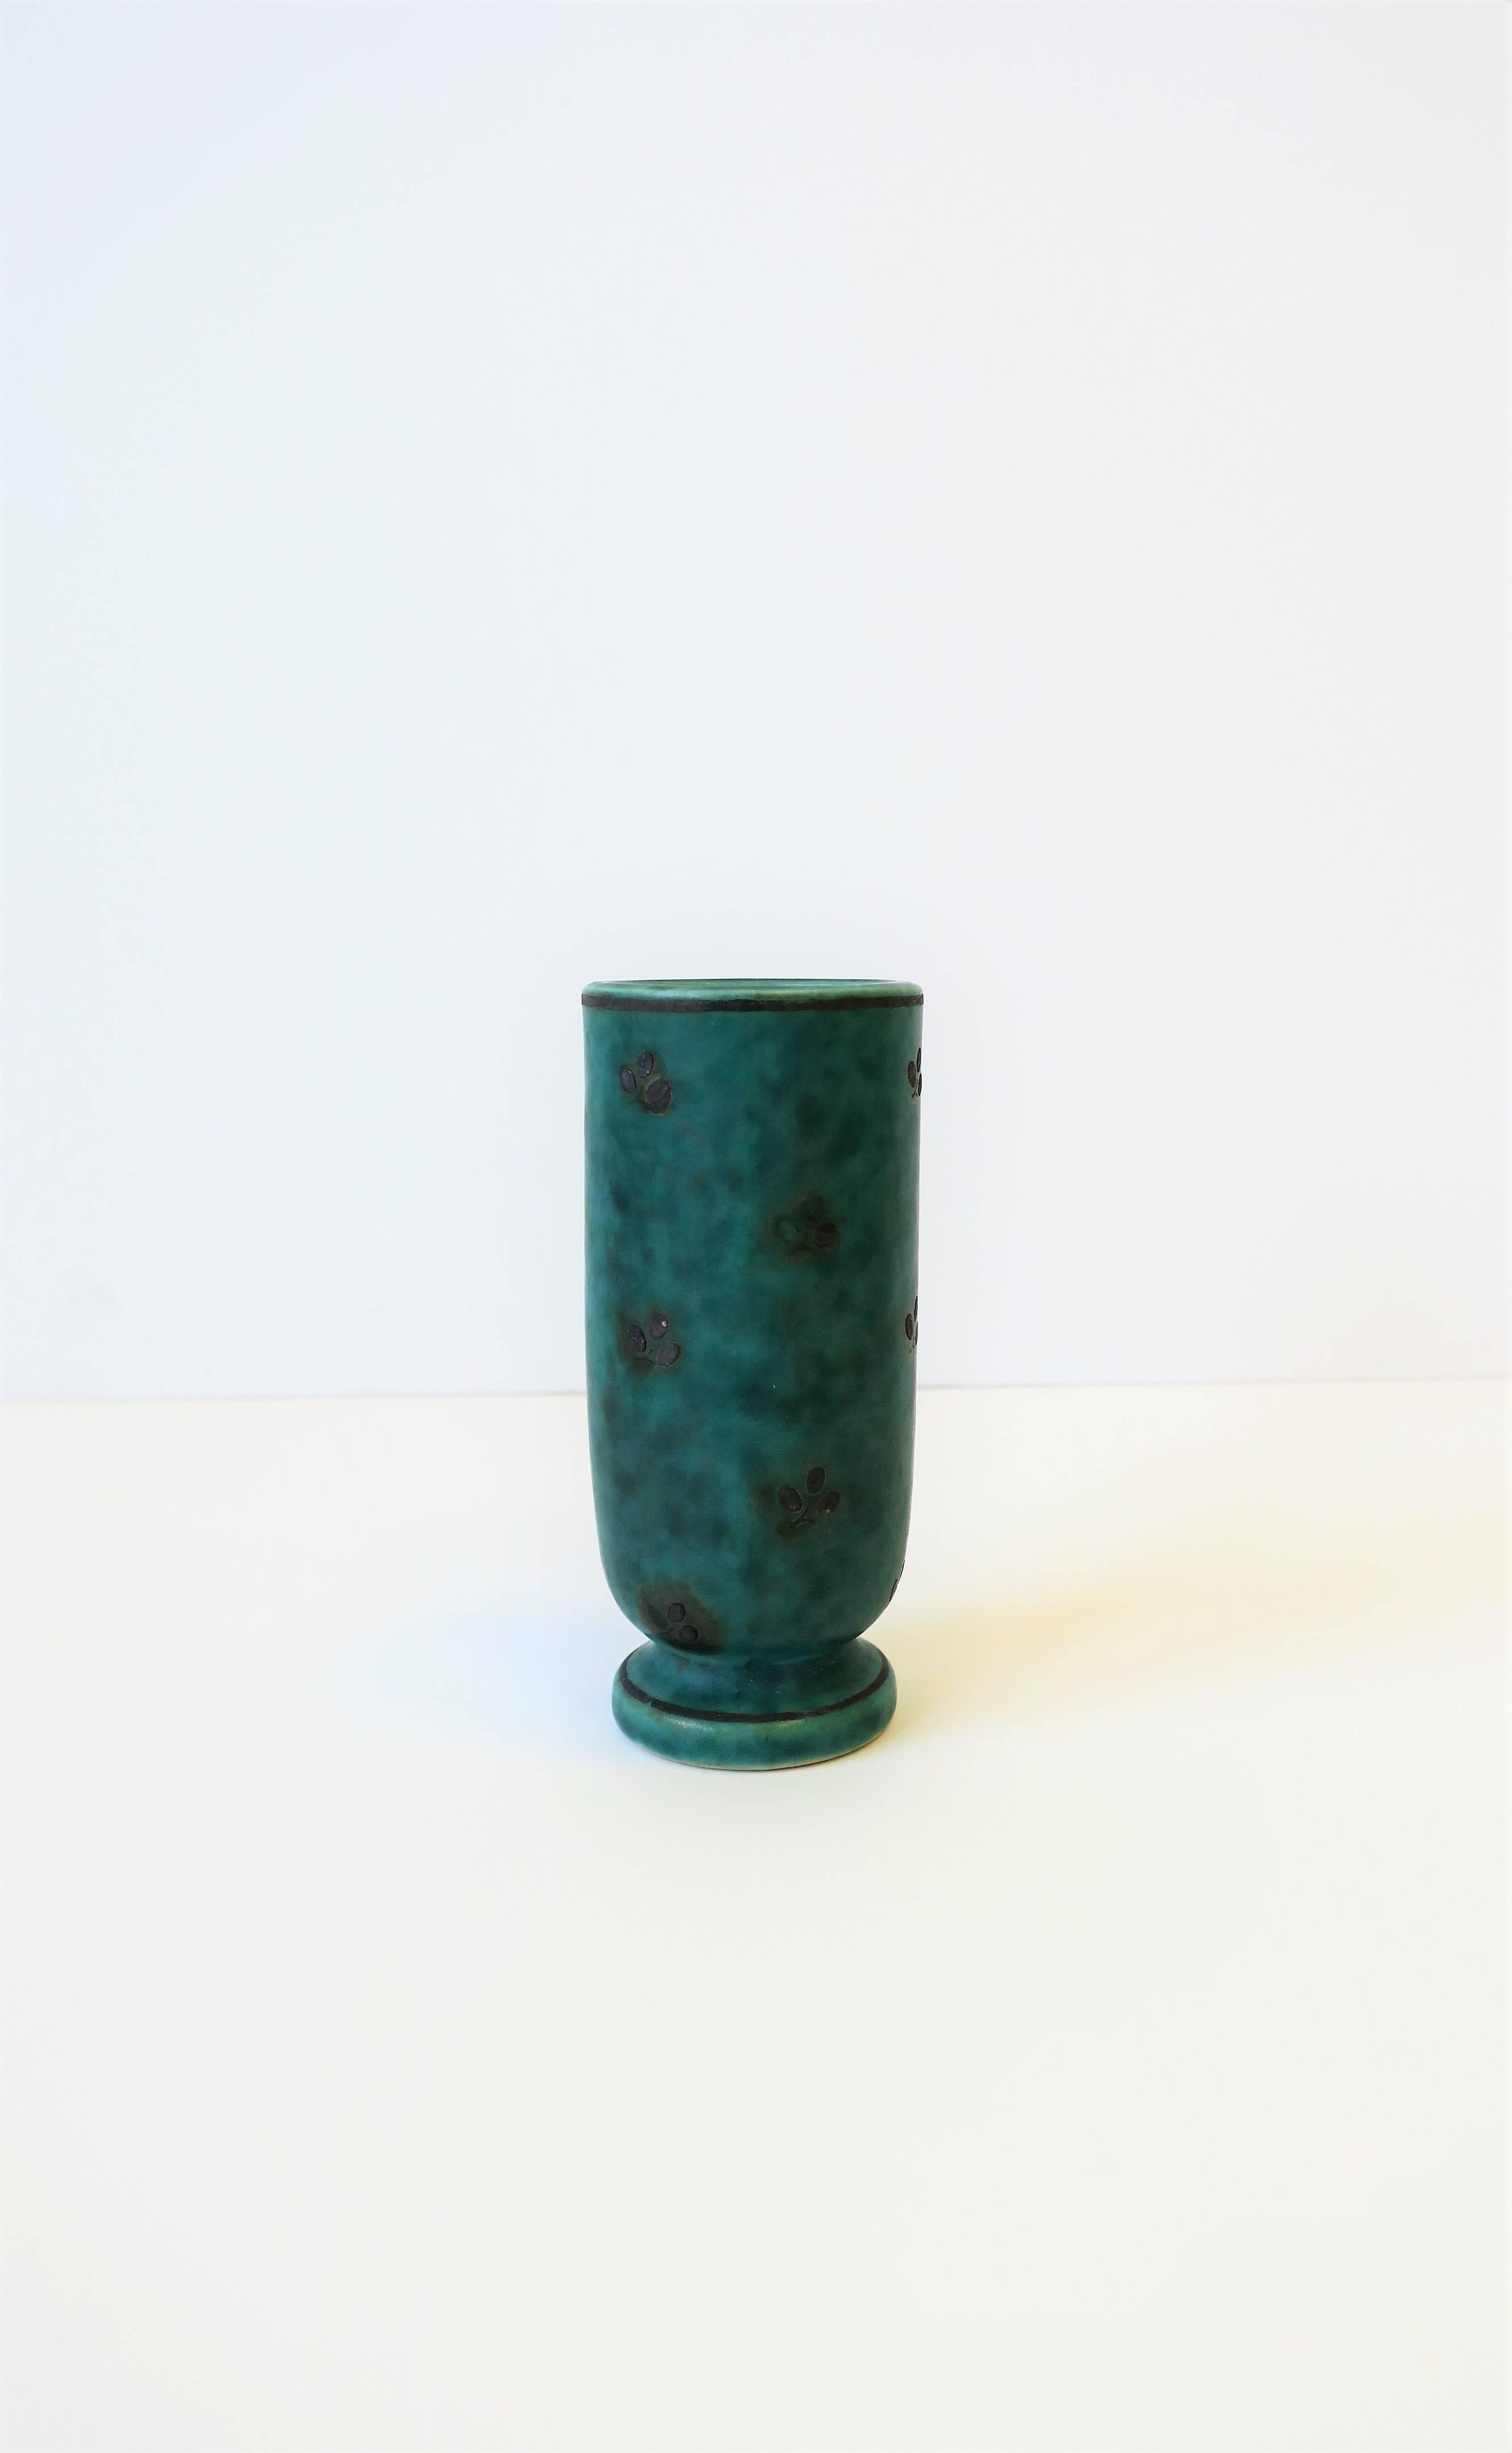 A beautiful petite Swedish pottery vase in a blue/green hue with tiny sterling silver leaf application, circa mid-20th century, Sweden. With maker's mark on bottom as show in image #15; 